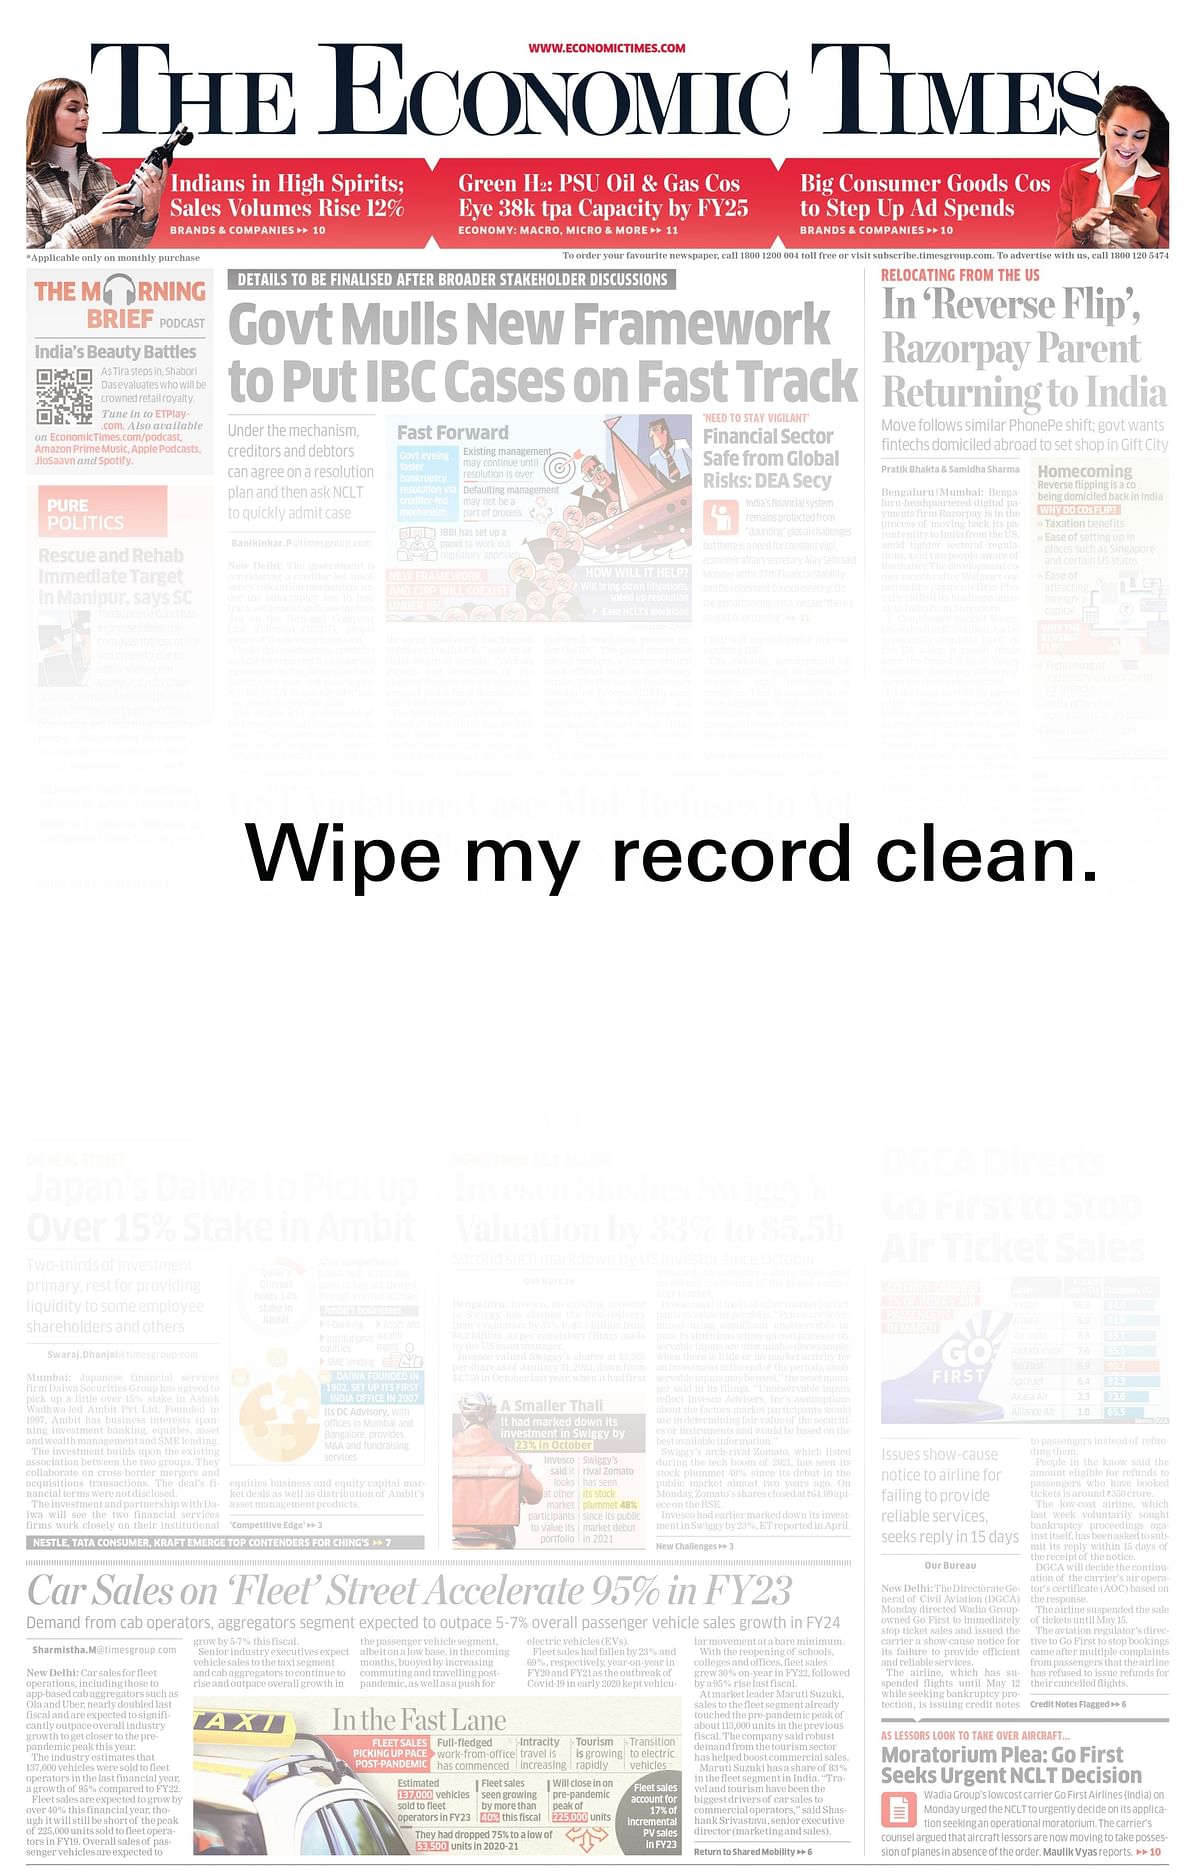 HSBC India's new campaign 'My Account Starts Today' starts with a "clean record"